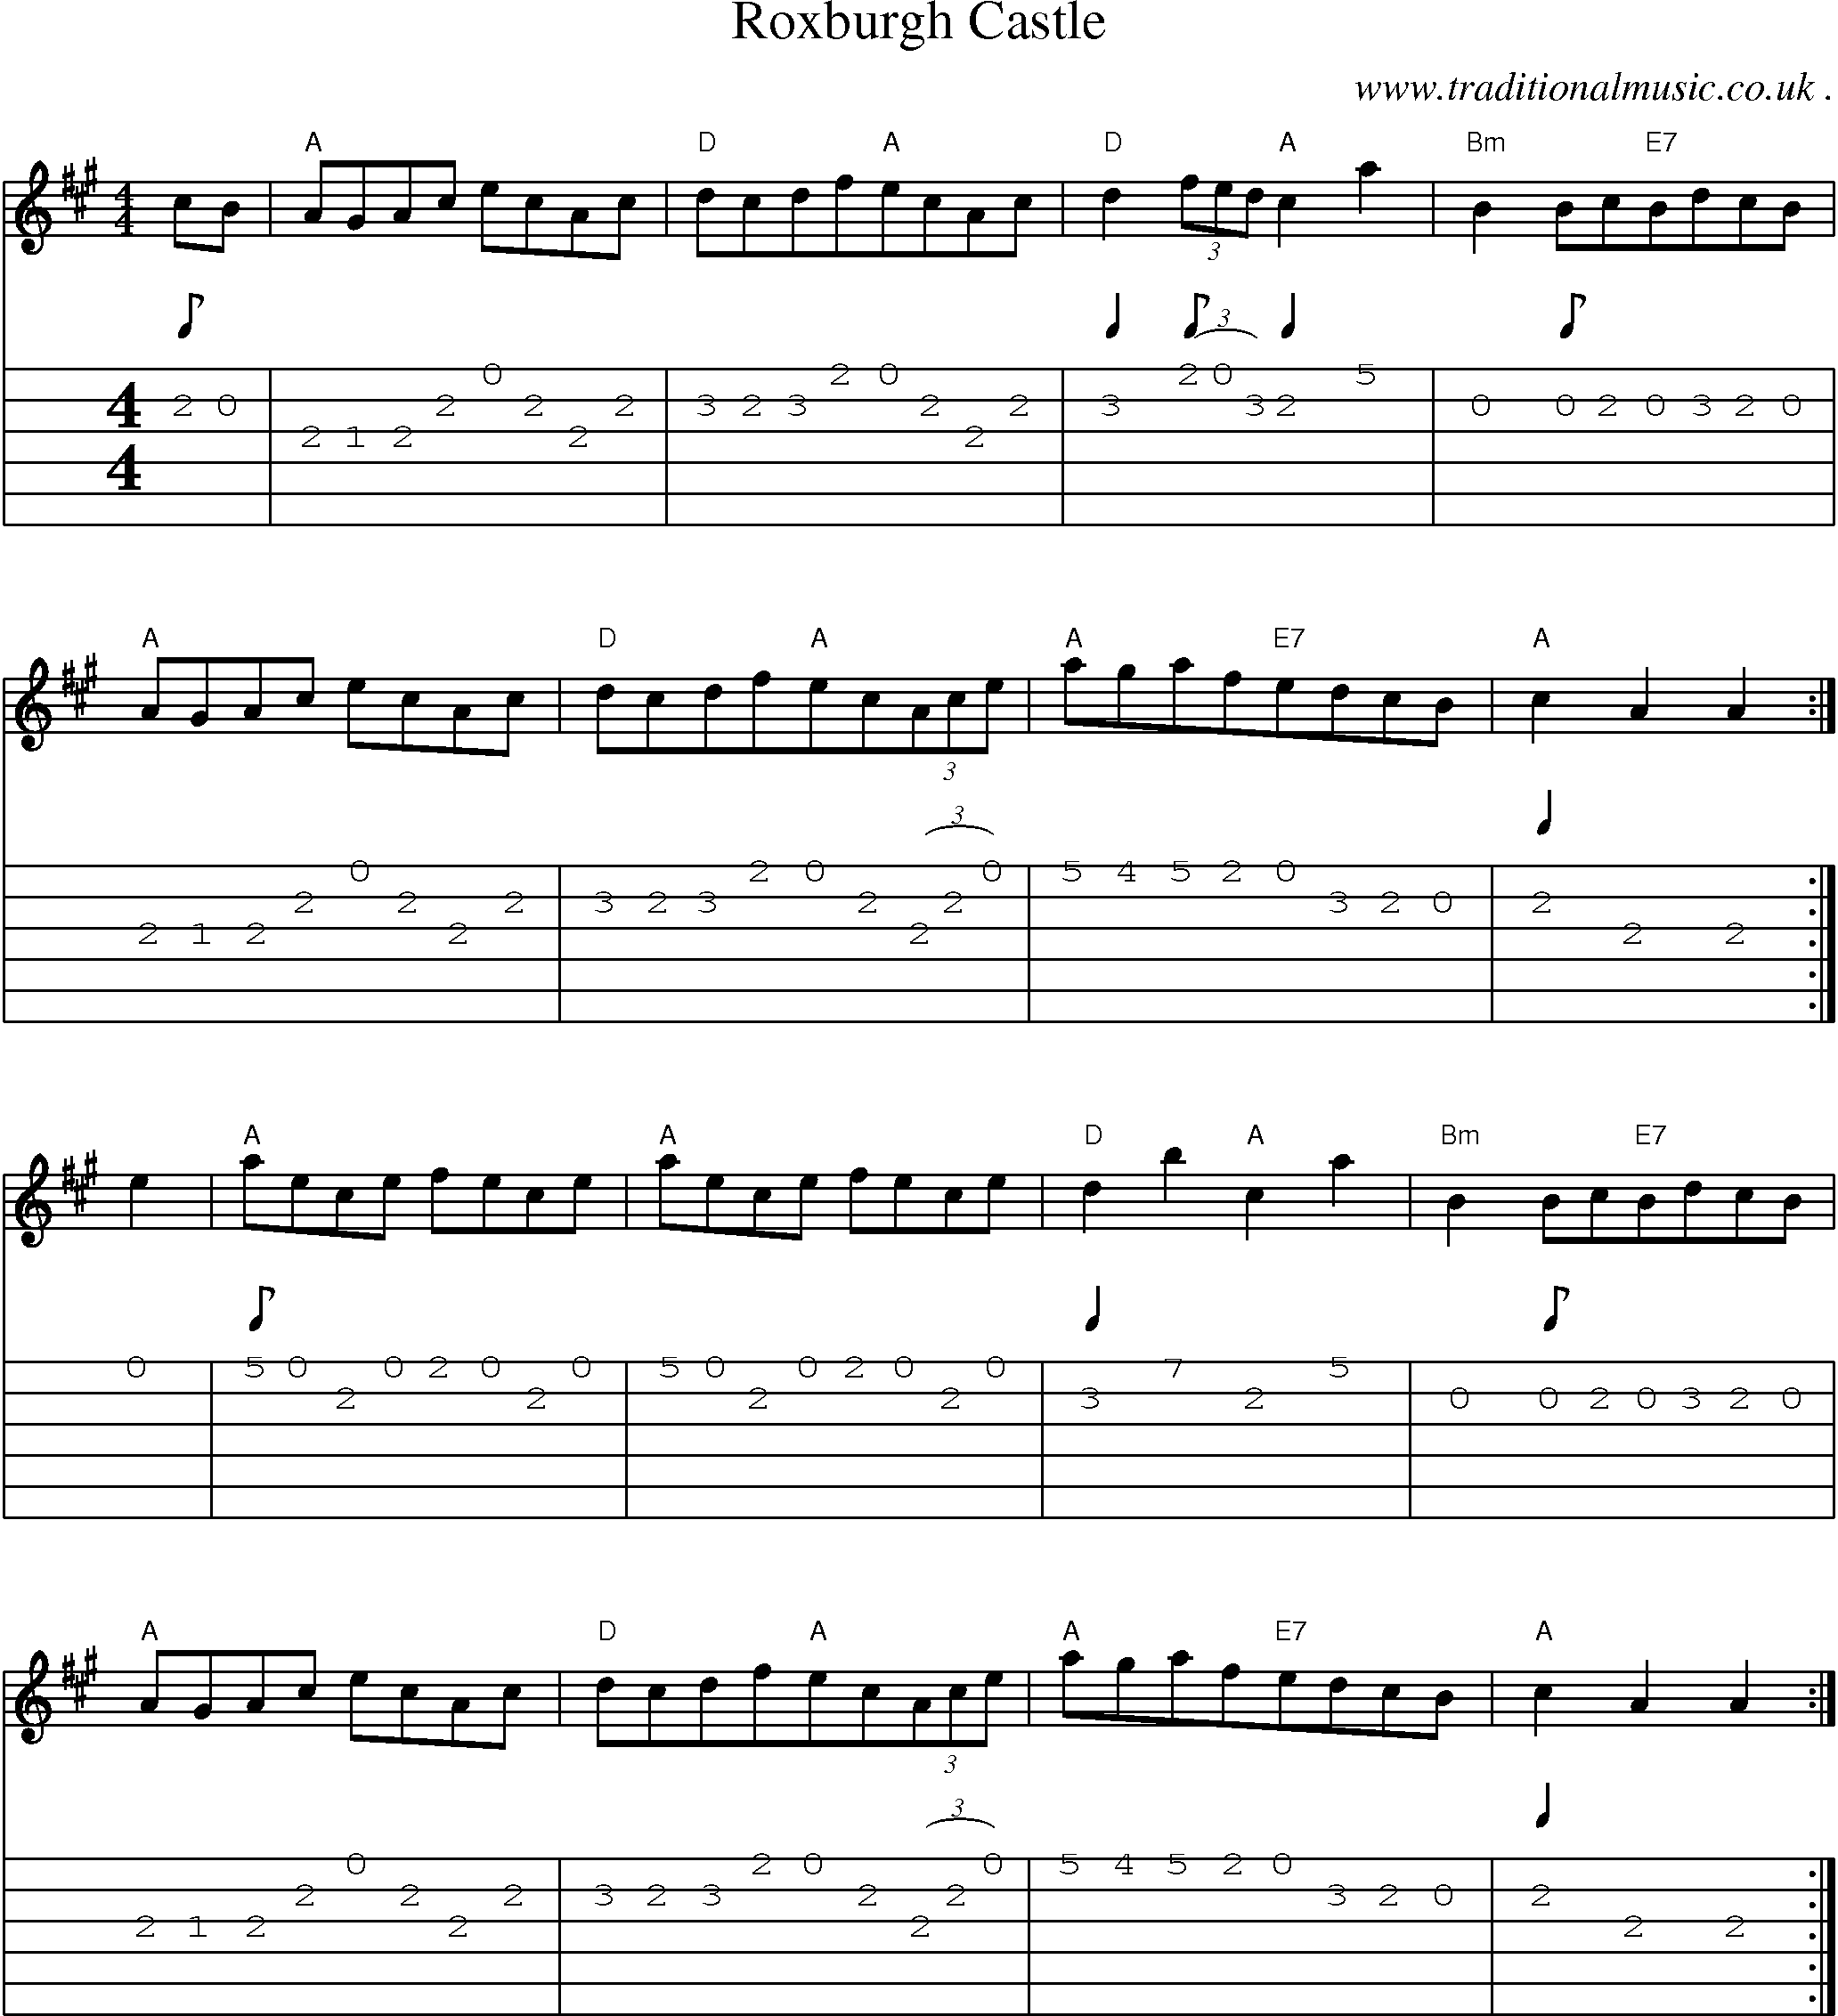 Sheet-Music and Guitar Tabs for Roxburgh Castle